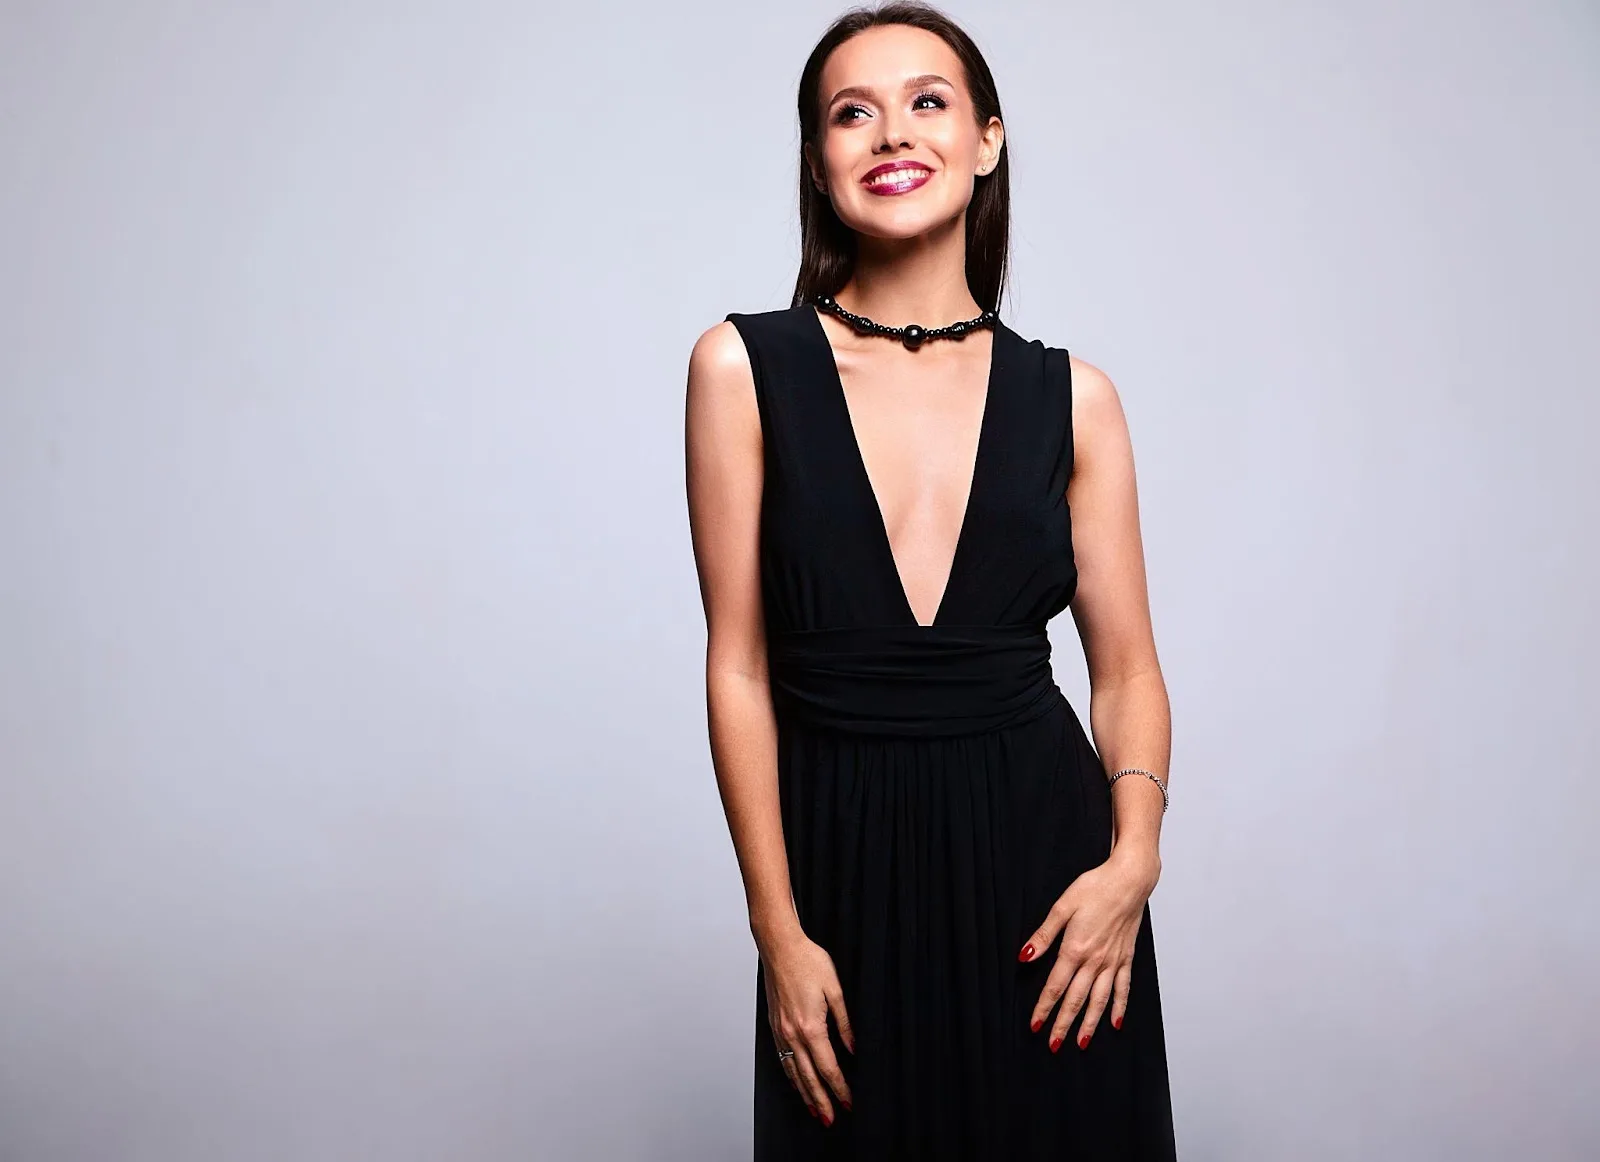 Turn Heads This Holiday Season with These 5 Gorgeous Black Dresses for Festive Parties